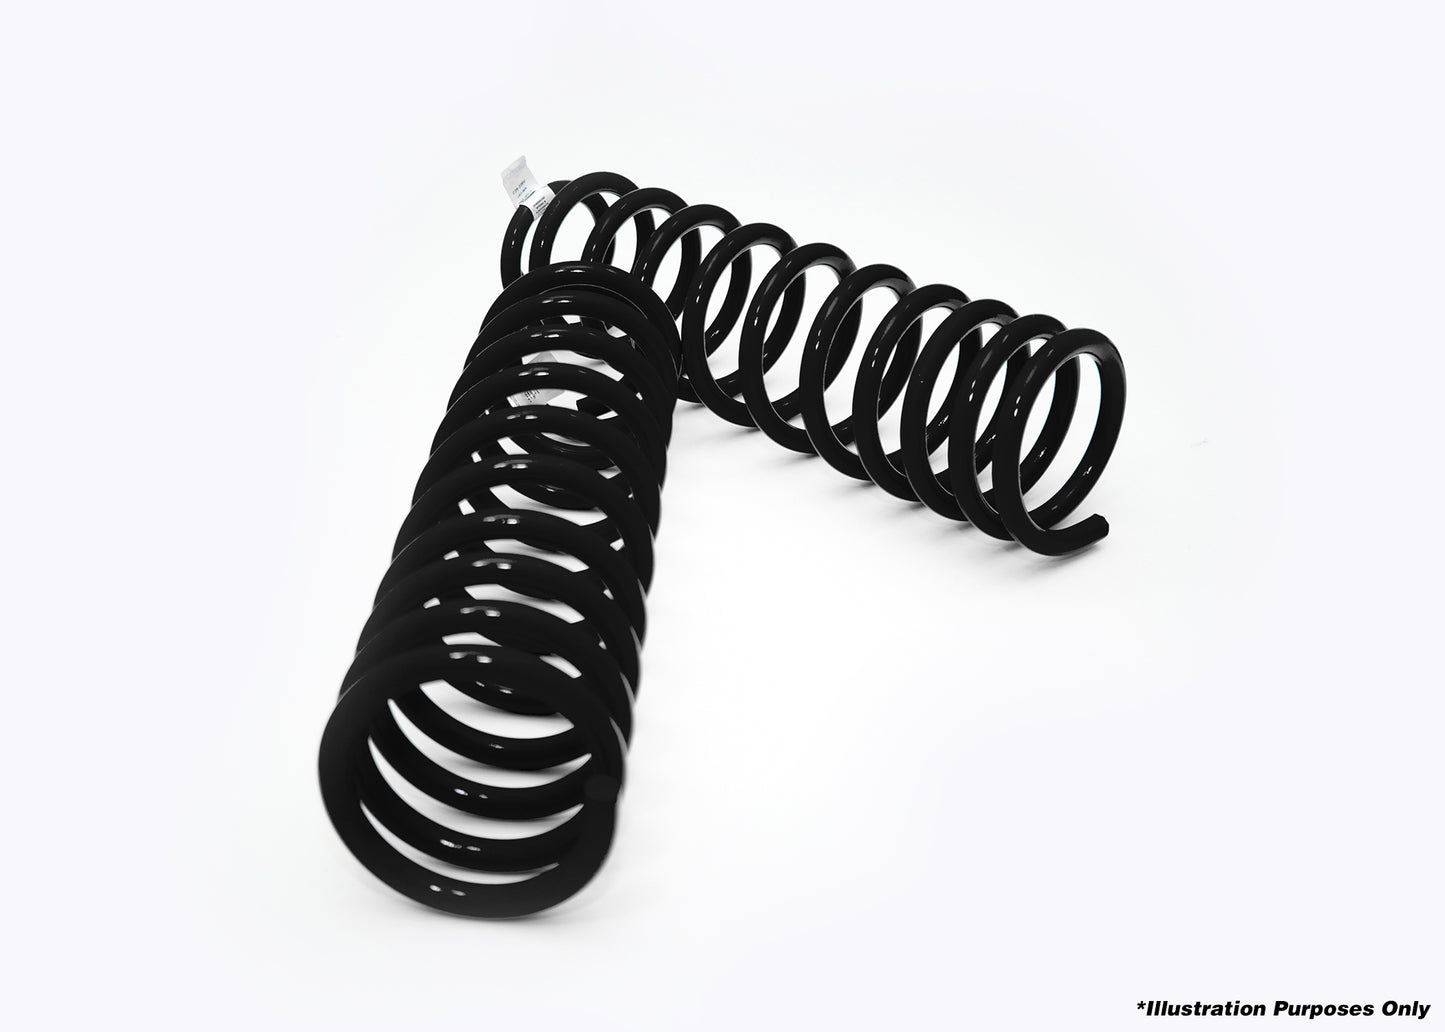 Dobinsons Pair of Coils for Toyota, Lexus and other vehicles. (C59-350) - C59-350B